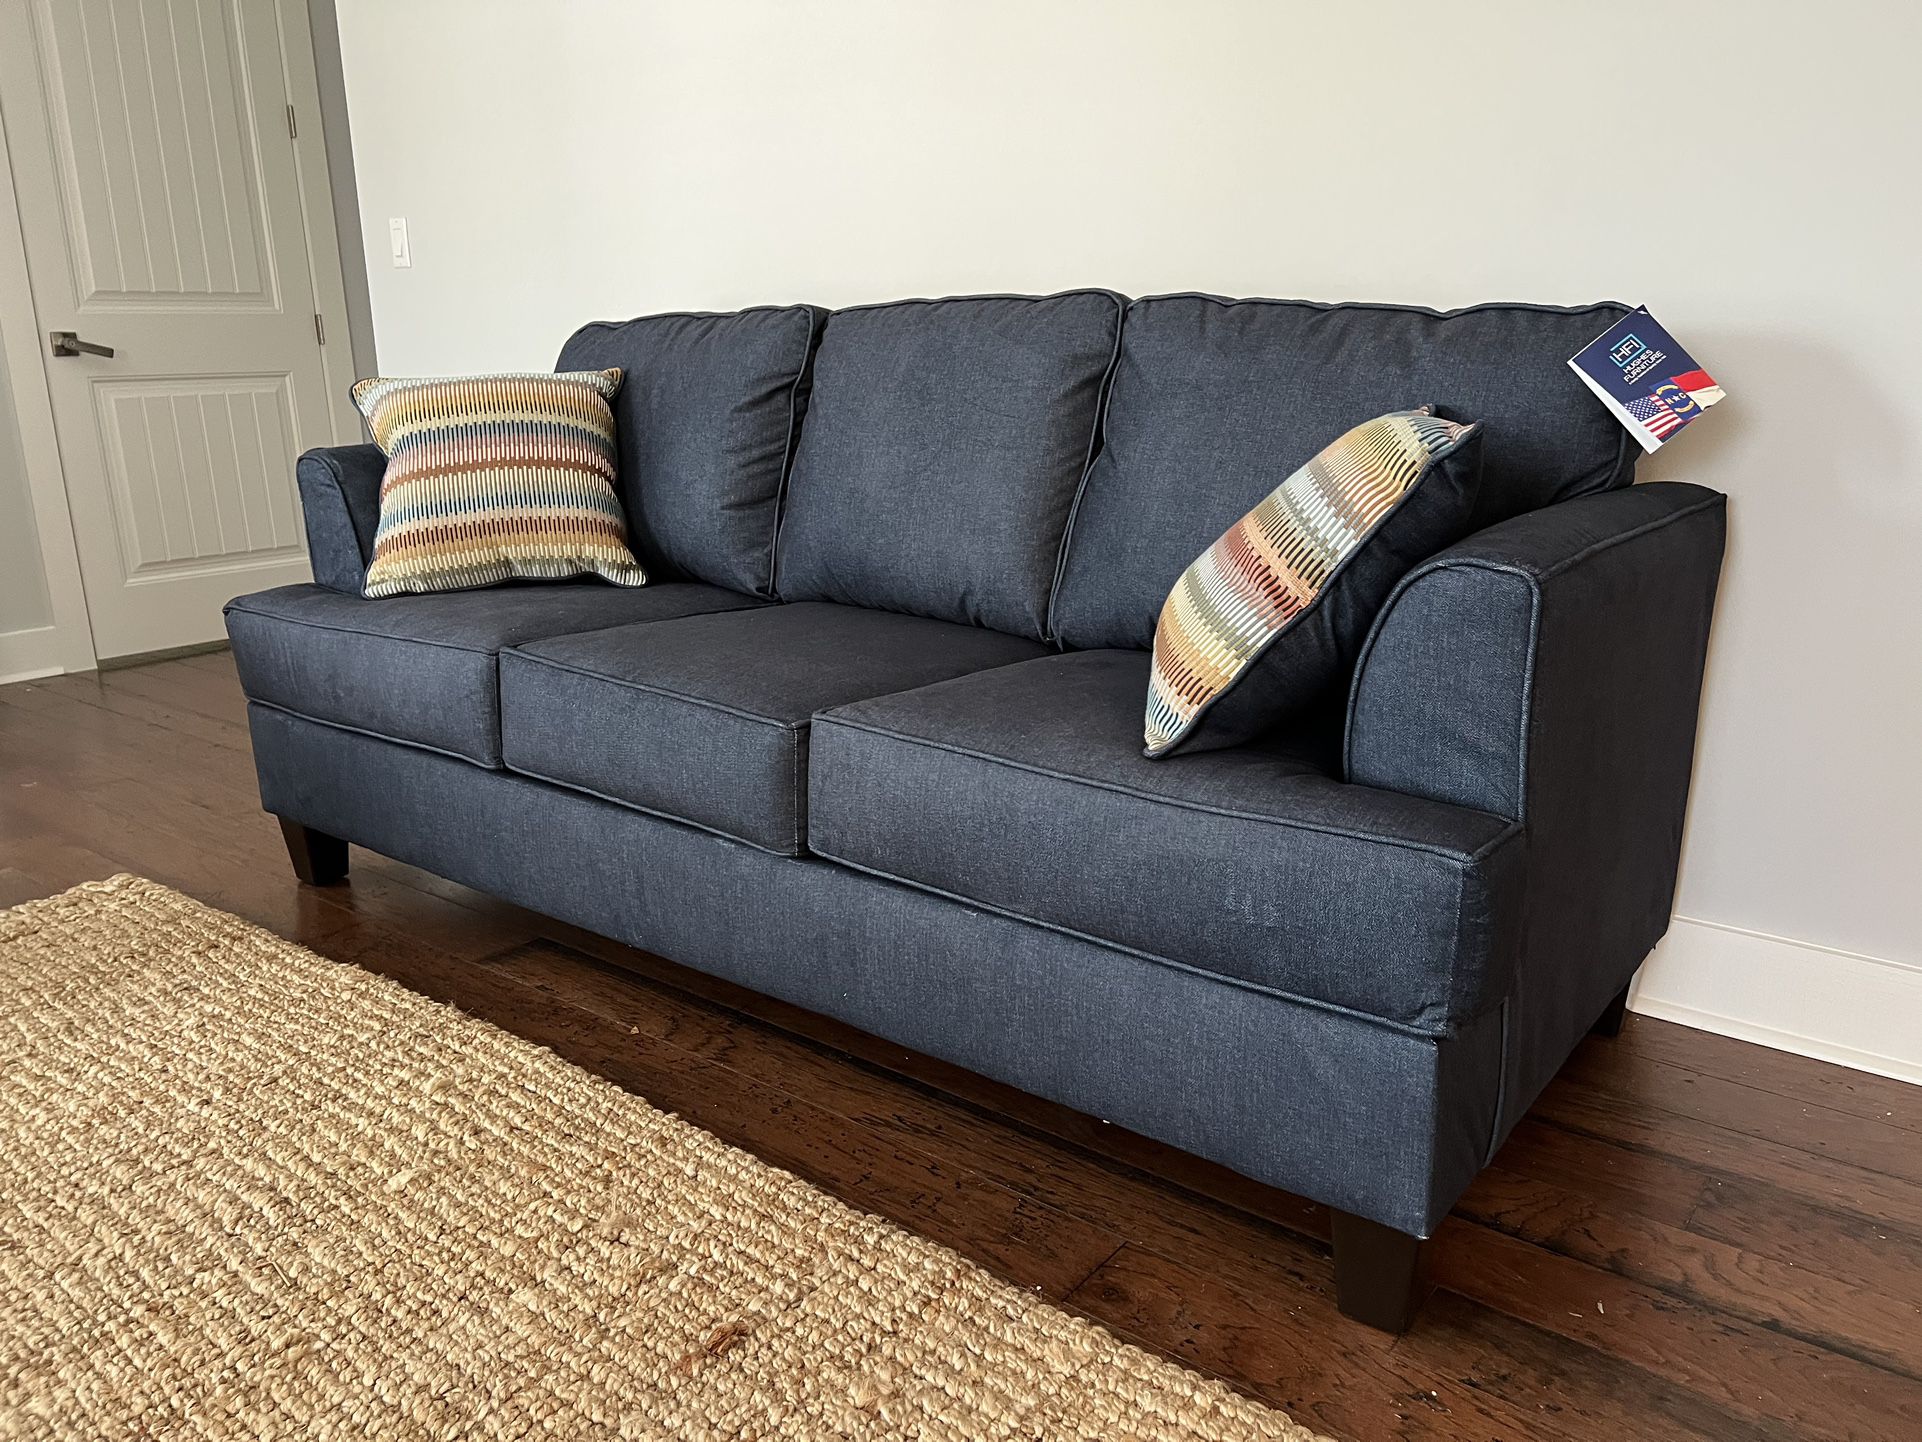 Sleeper Sofa In Stock Comes With Queen Size Mattress. Free Delivery Same Day. 90 Days Same As Cash Financing Available 